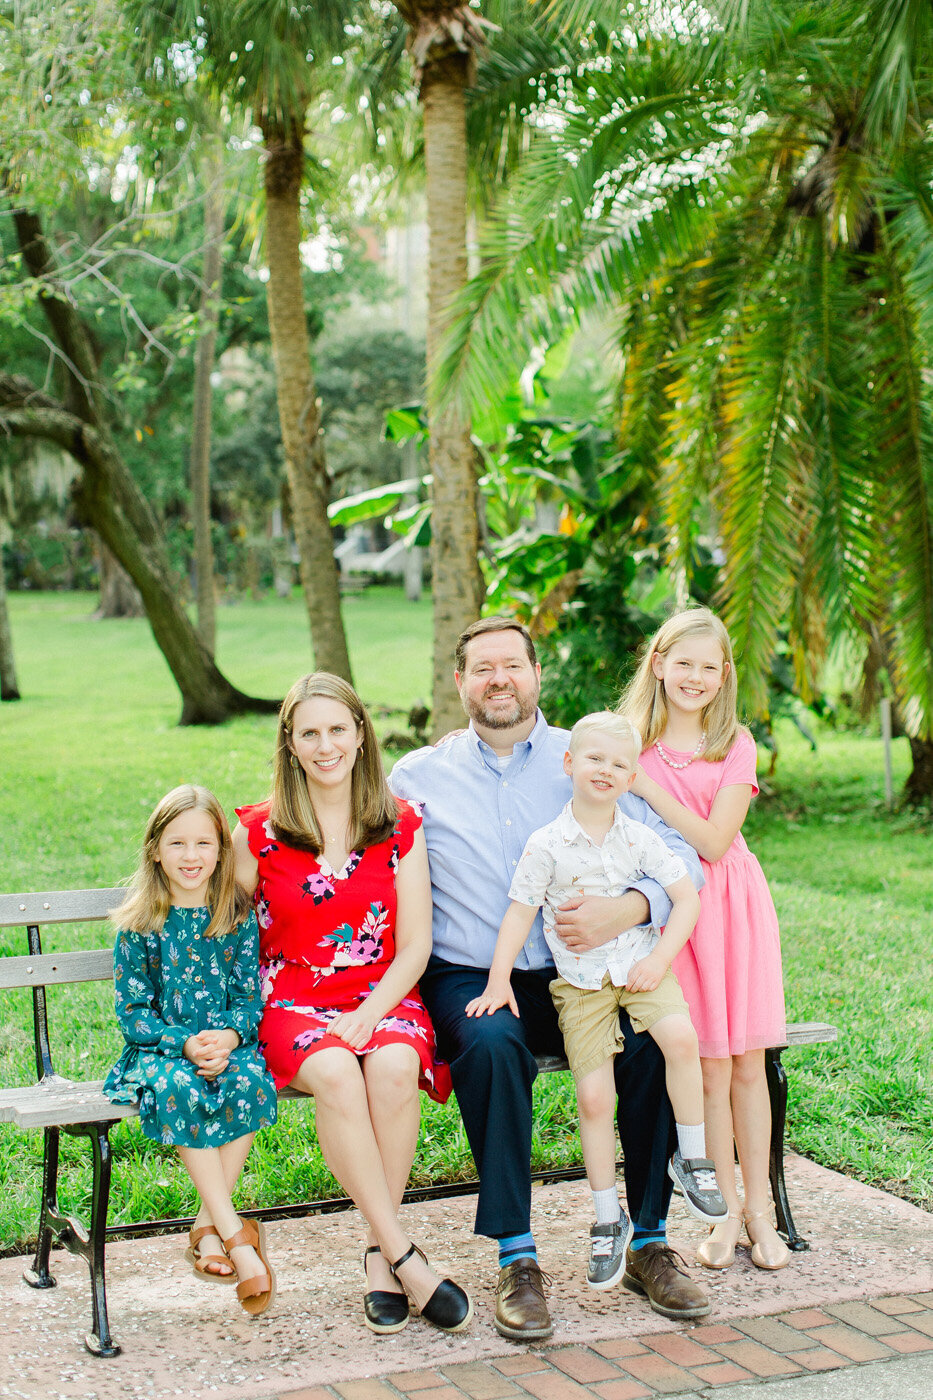 Tampa Family Photographer - Ailyn LaTorre 22